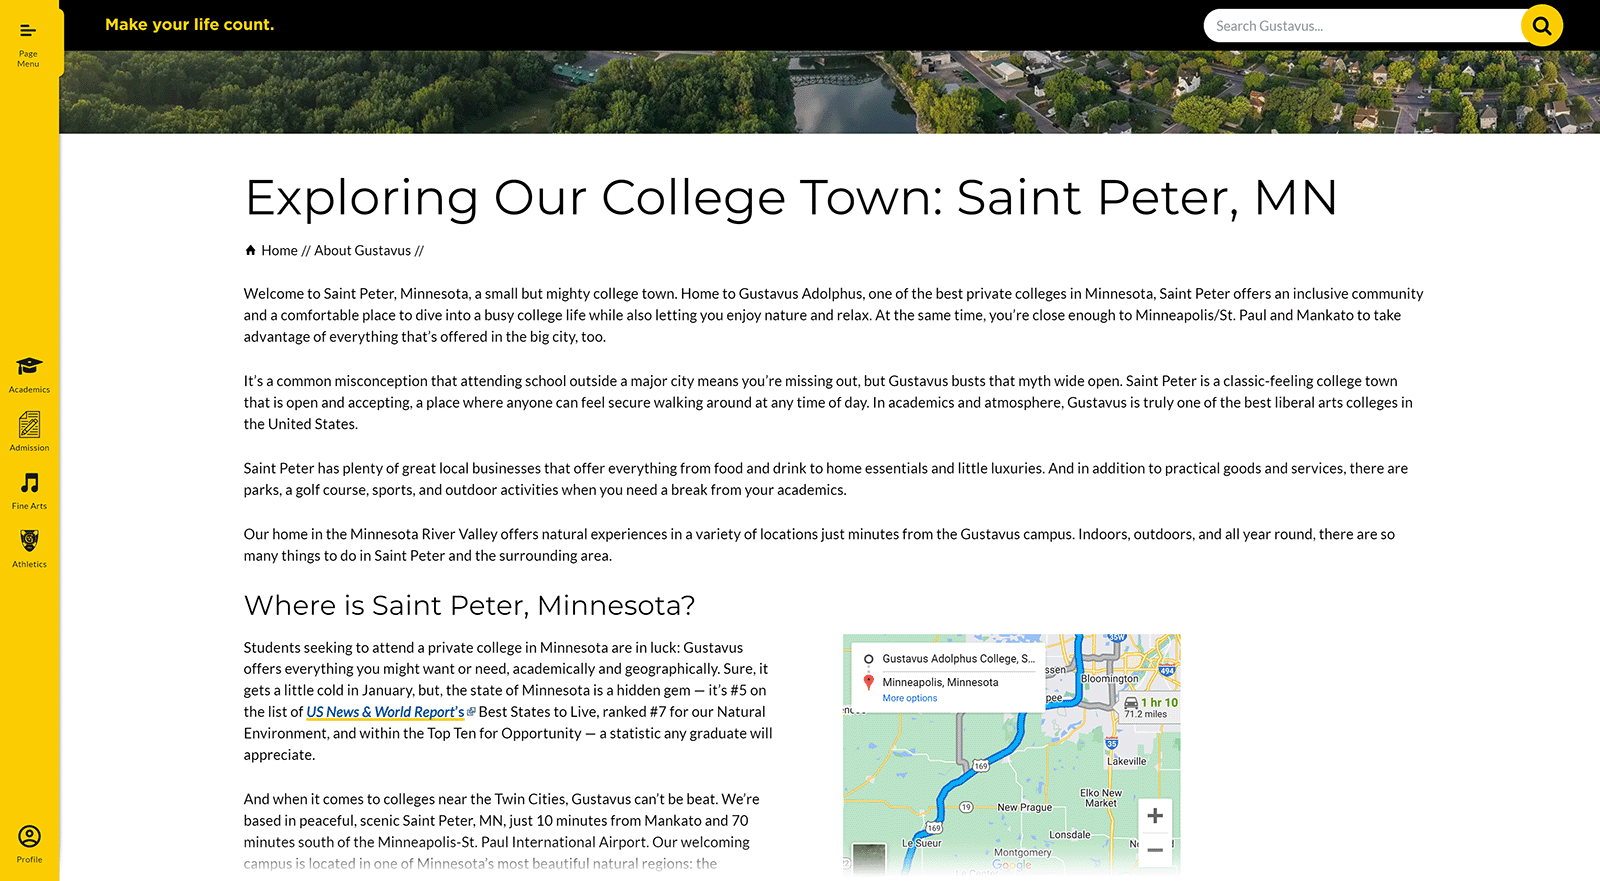 Gustavus Adolphus College local page about Saint Peter, Minnesota.